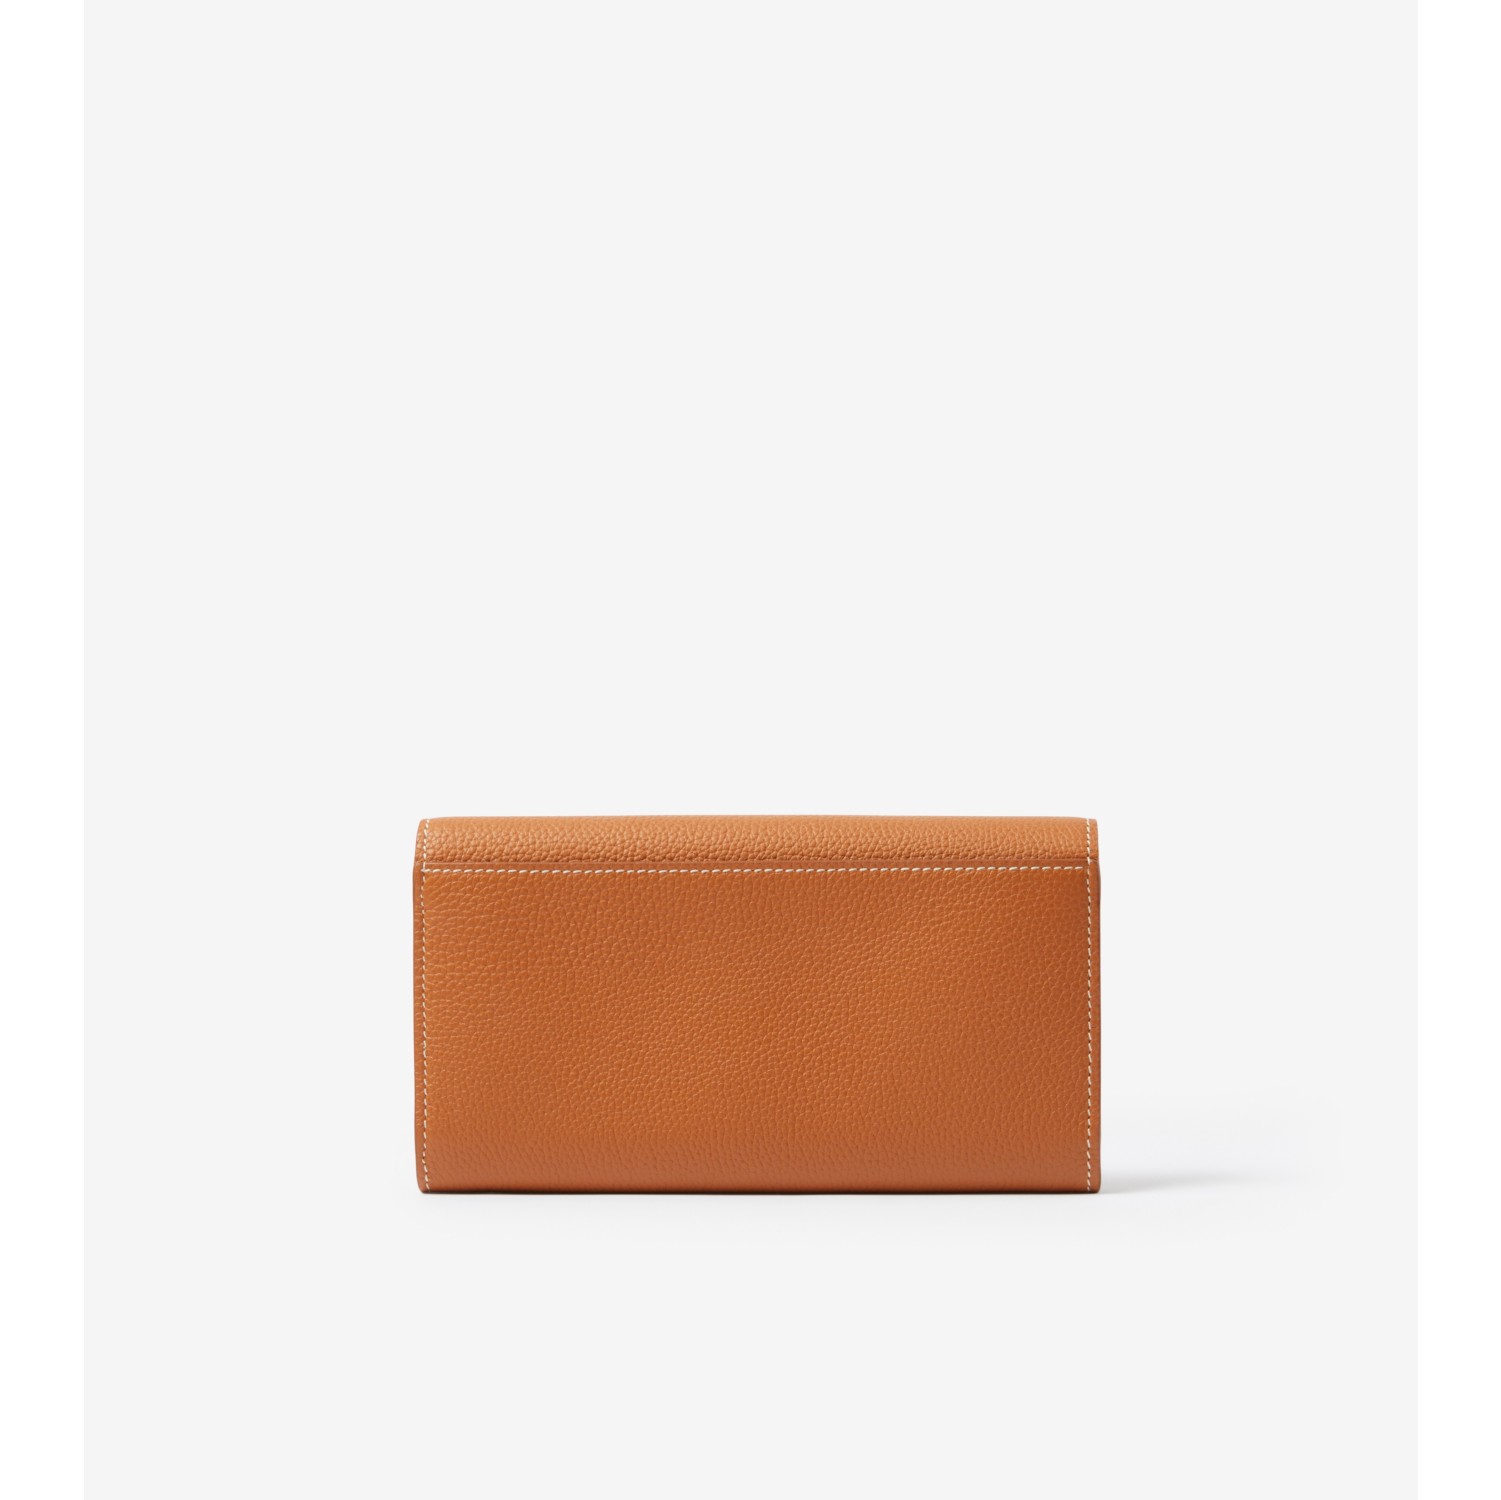 Grainy Leather TB Continental Wallet in Warm russet brown - Women ...